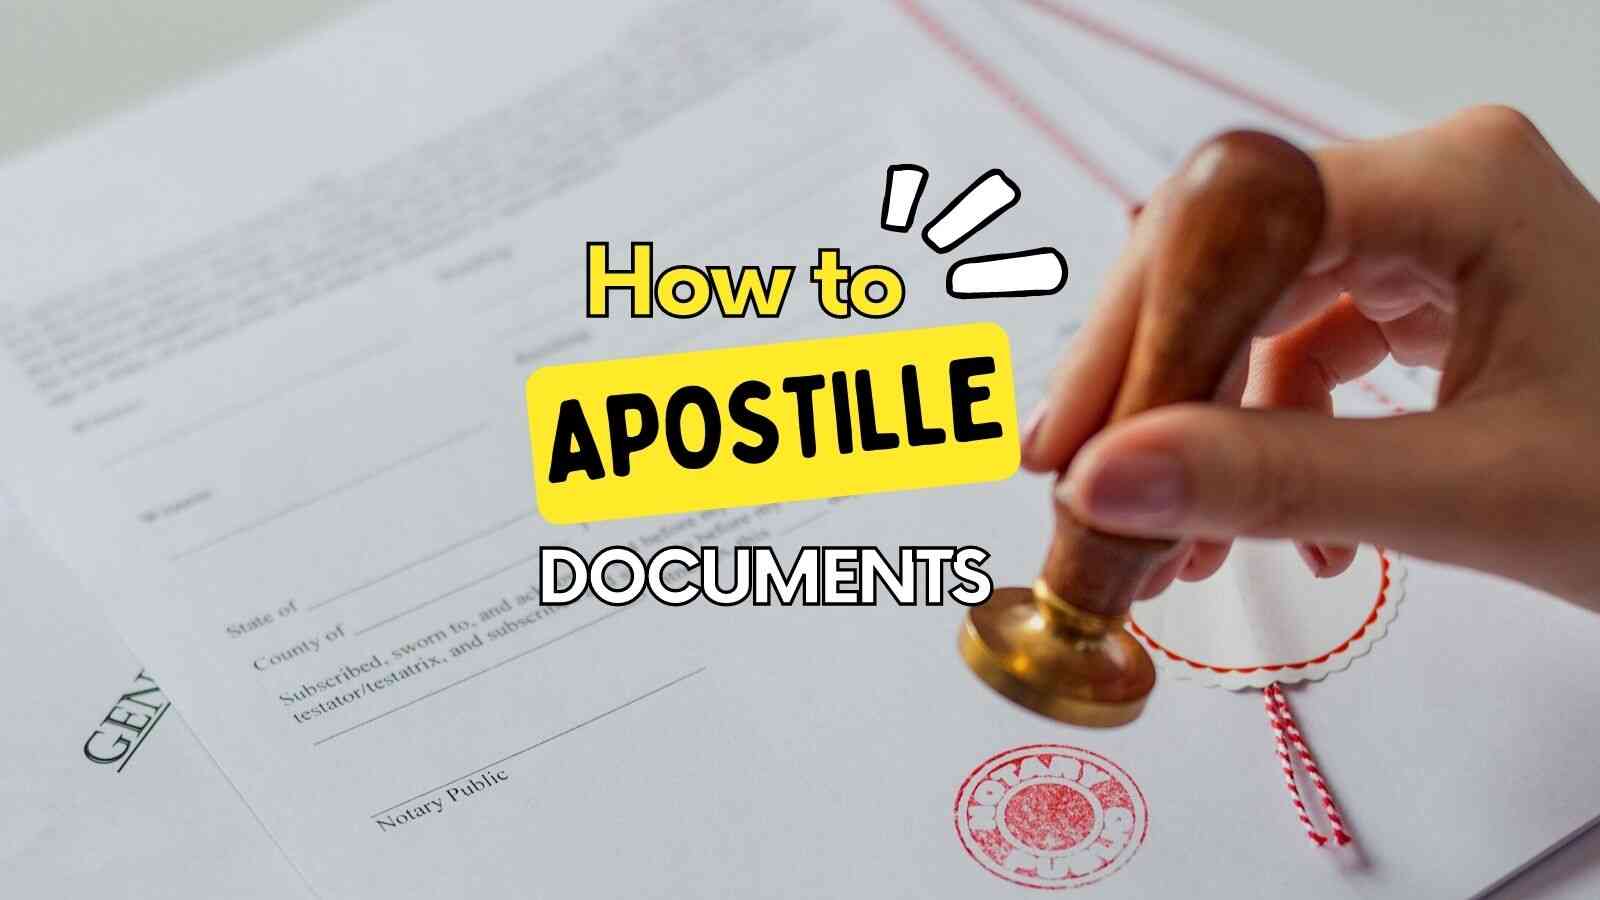 how to apostille documents in dfa philippines